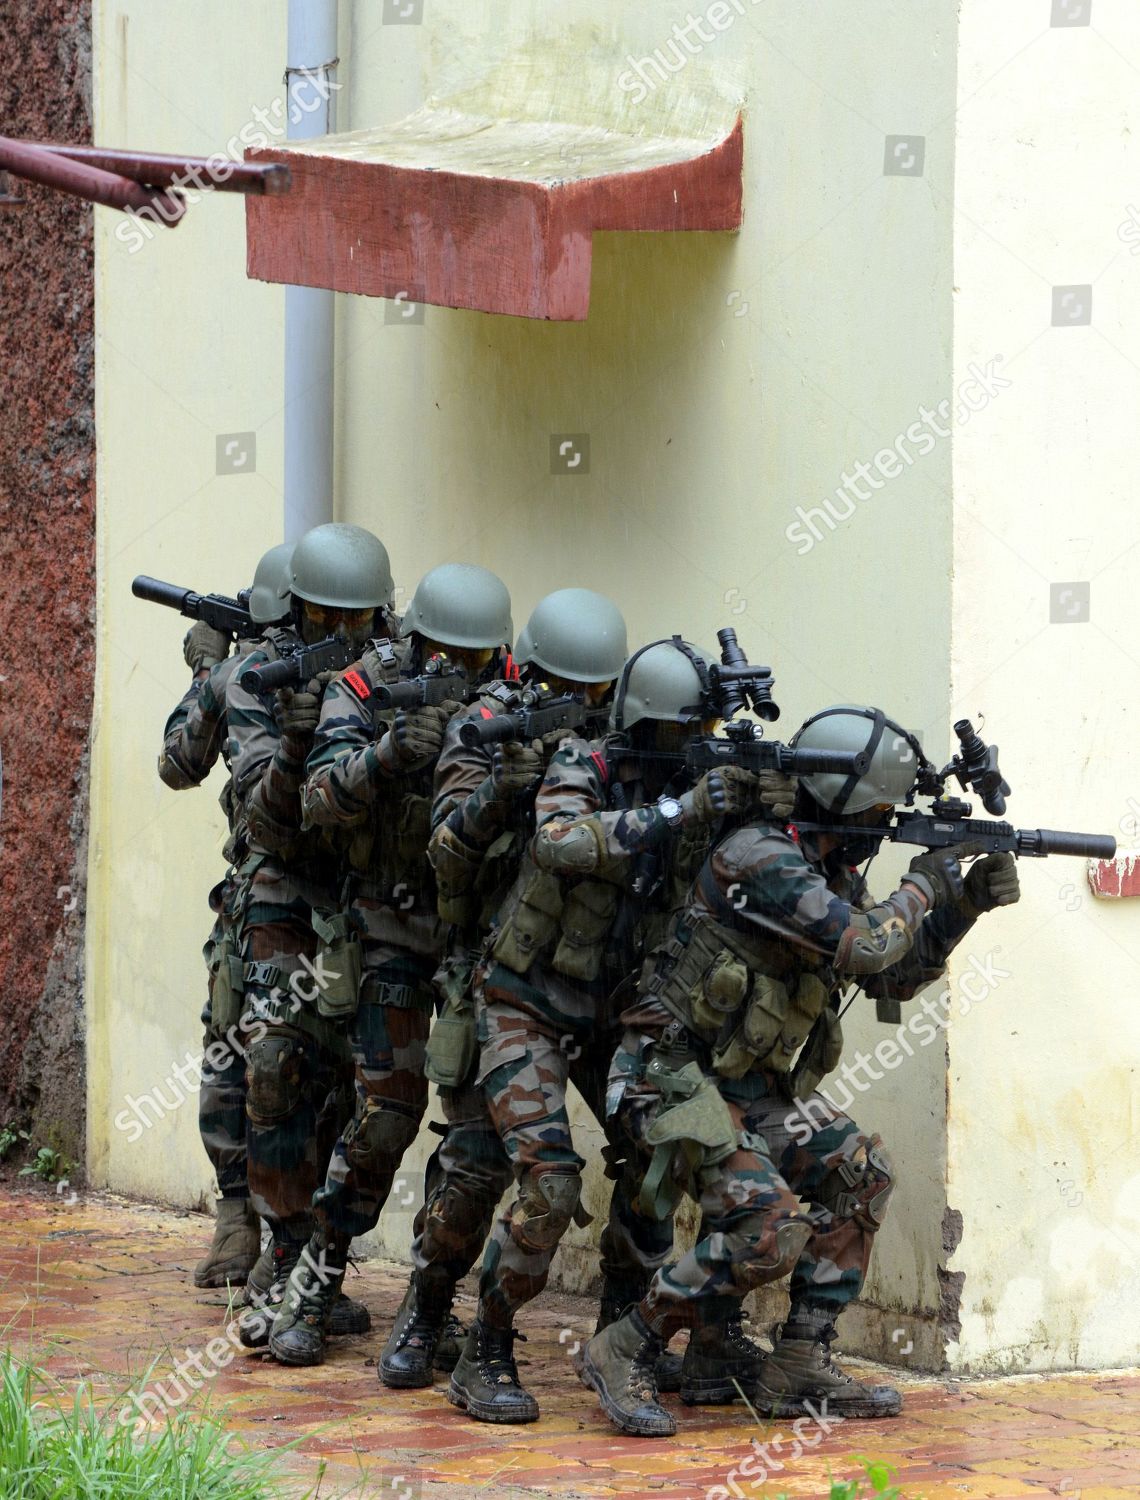 indo-thailand-joint-military-exercise-in-meghalaya-india-umroi-shutterstock-editorial-10421600d.jpg